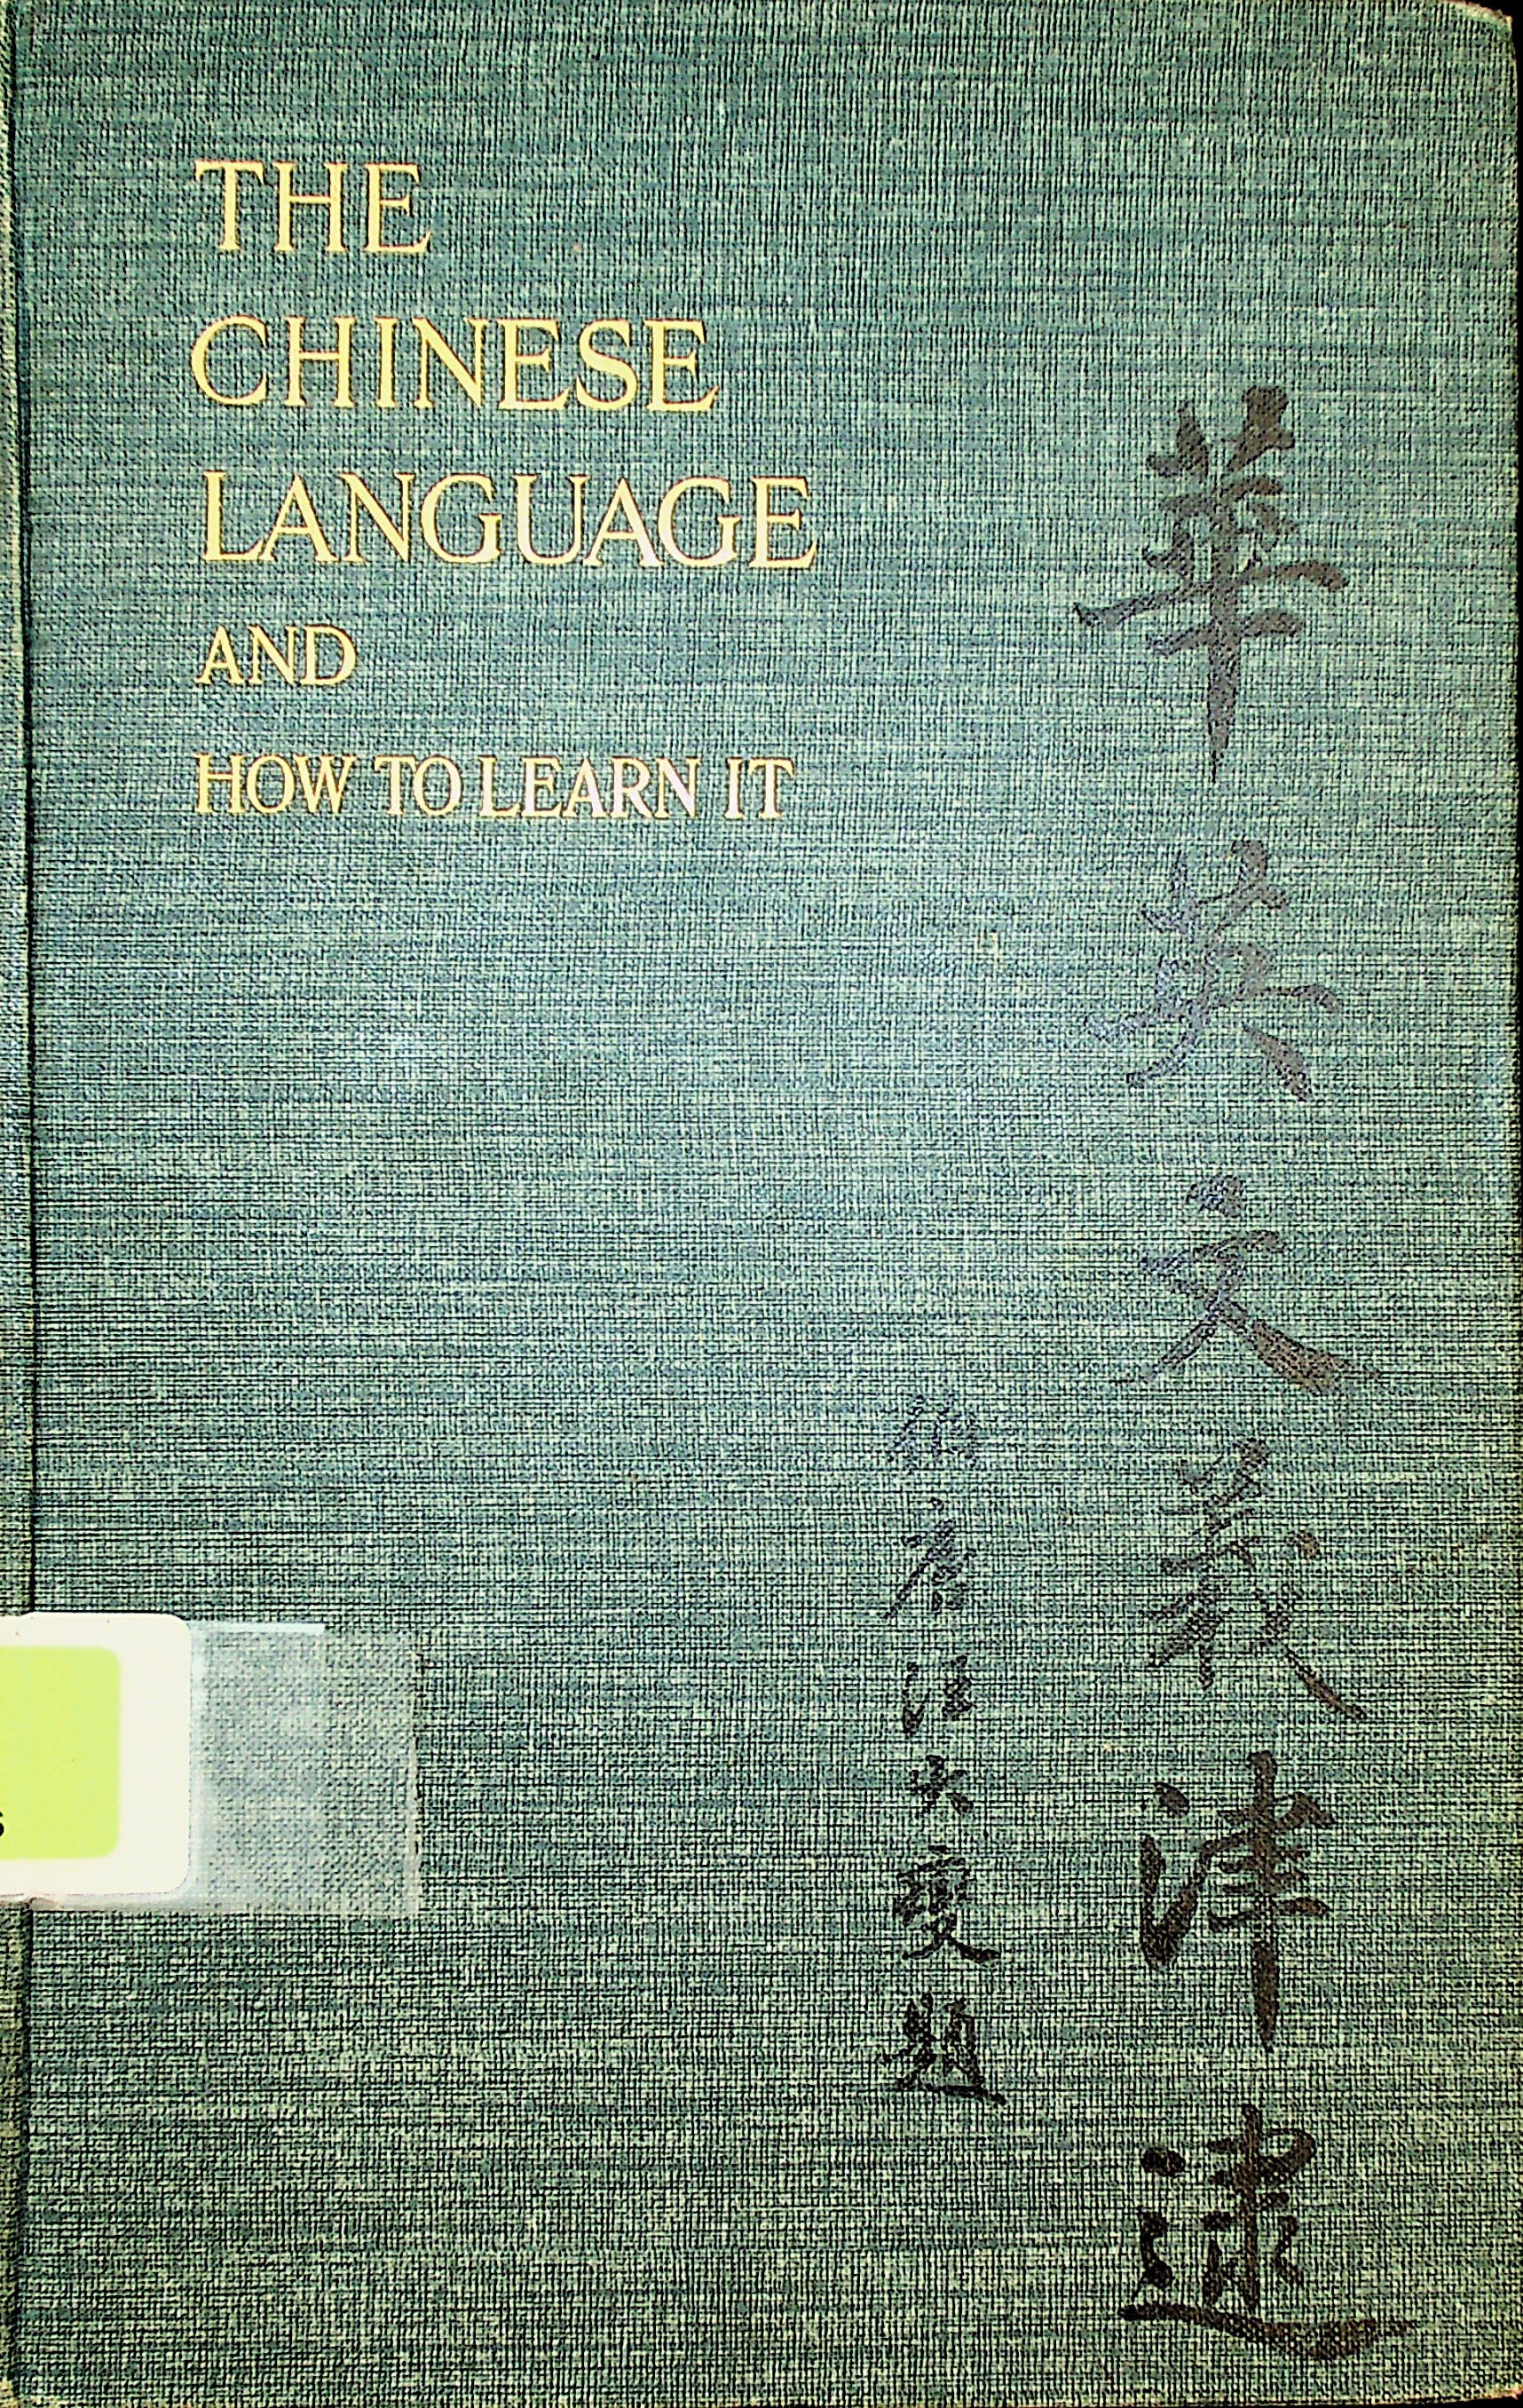 The Chinese language and how to learn it : a manual for beginners